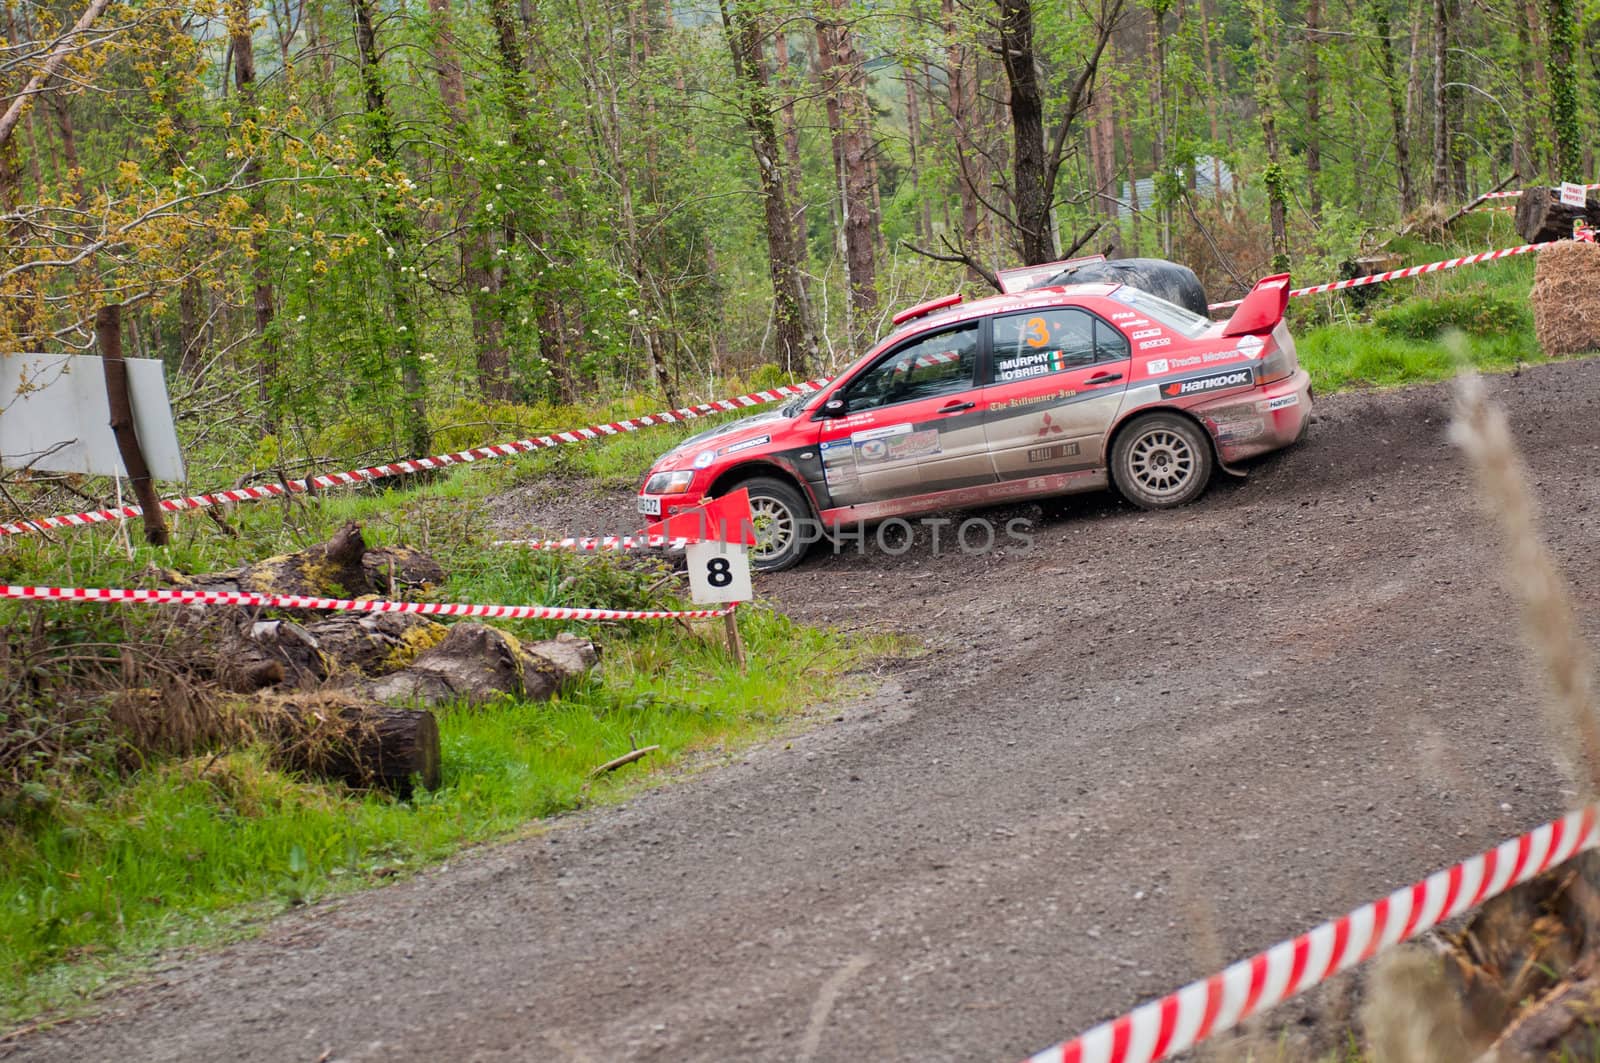 MALLOW, IRELAND - MAY 19: Stage Winner O. Murphy driving Mitsubishi Evo at the Jim Walsh Cork Forest Rally on May 19, 2012 in Mallow, Ireland. 4th round of the Valvoline Forest Rally Championship.